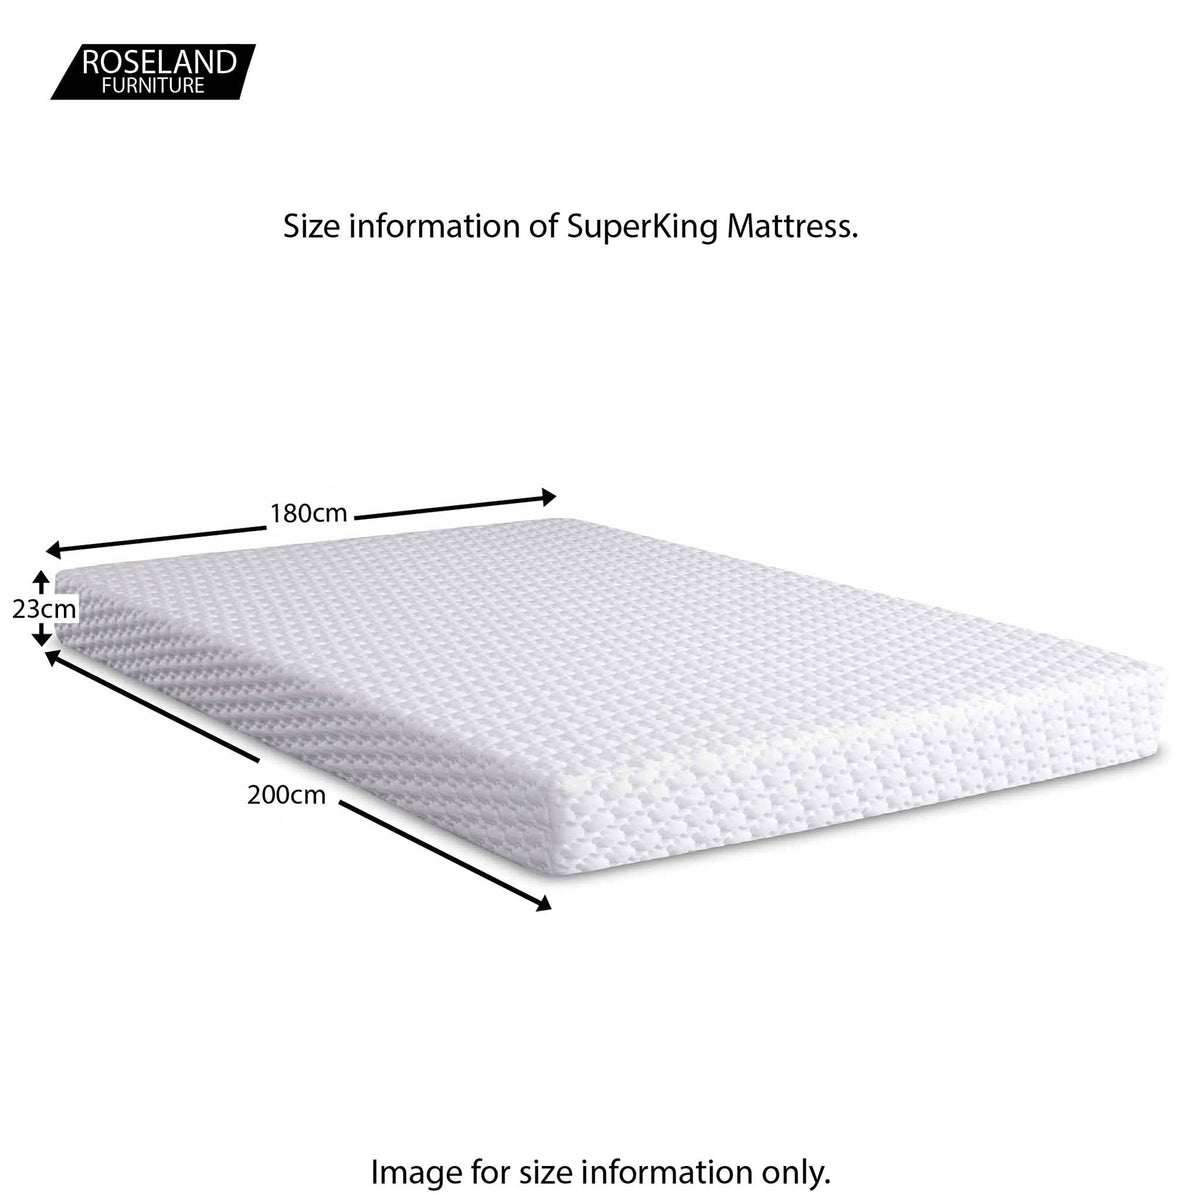 MemoryPedic Hybrid 2000 Mattresses with Latex & Memory Foam - adult 6ft super size guide